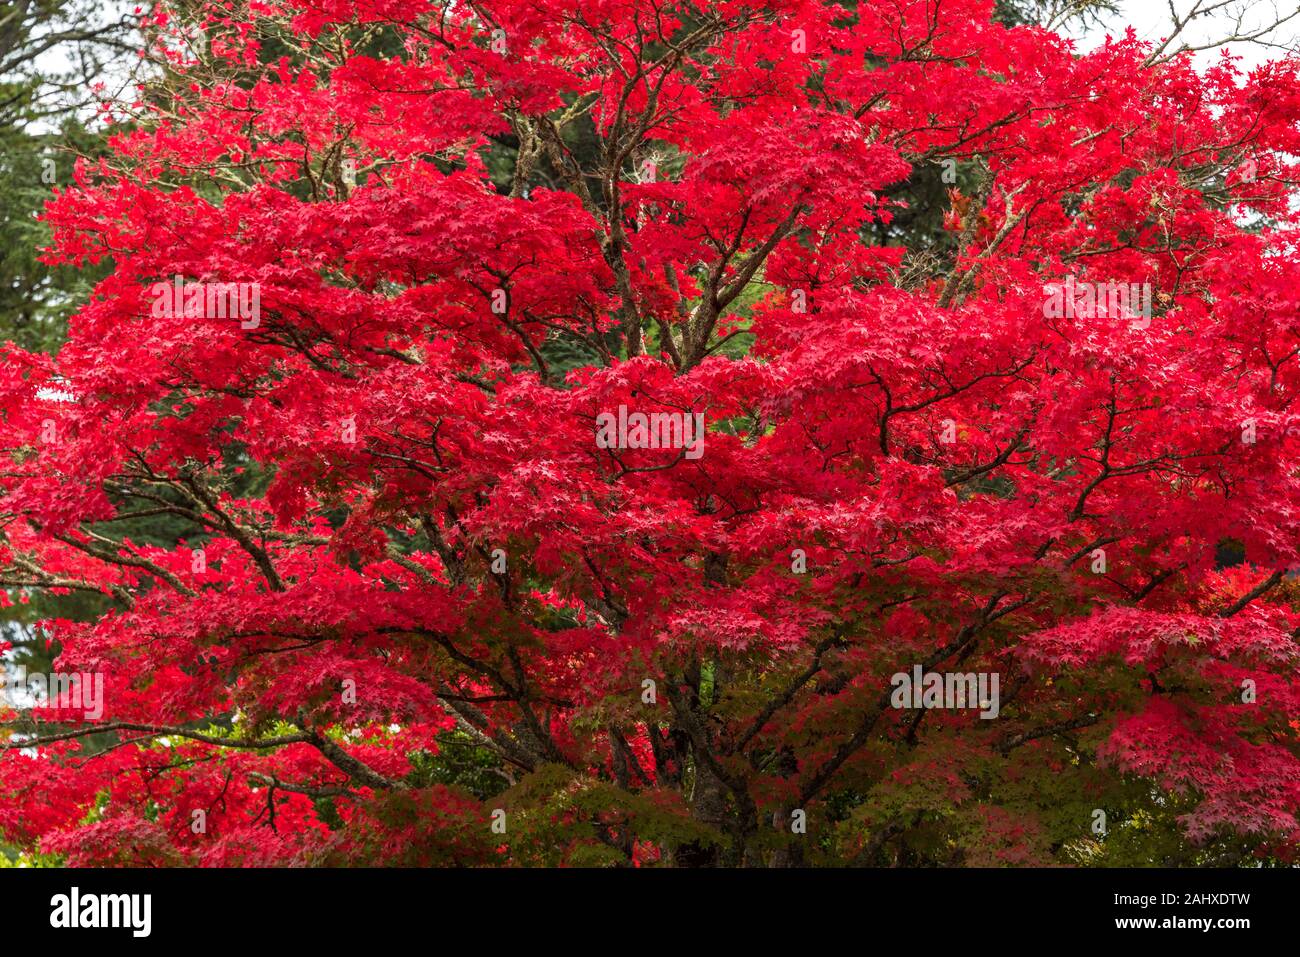 Autumn Landscape Of Japanese Maple Tree With Bright Red Leaves Stock Photo Alamy